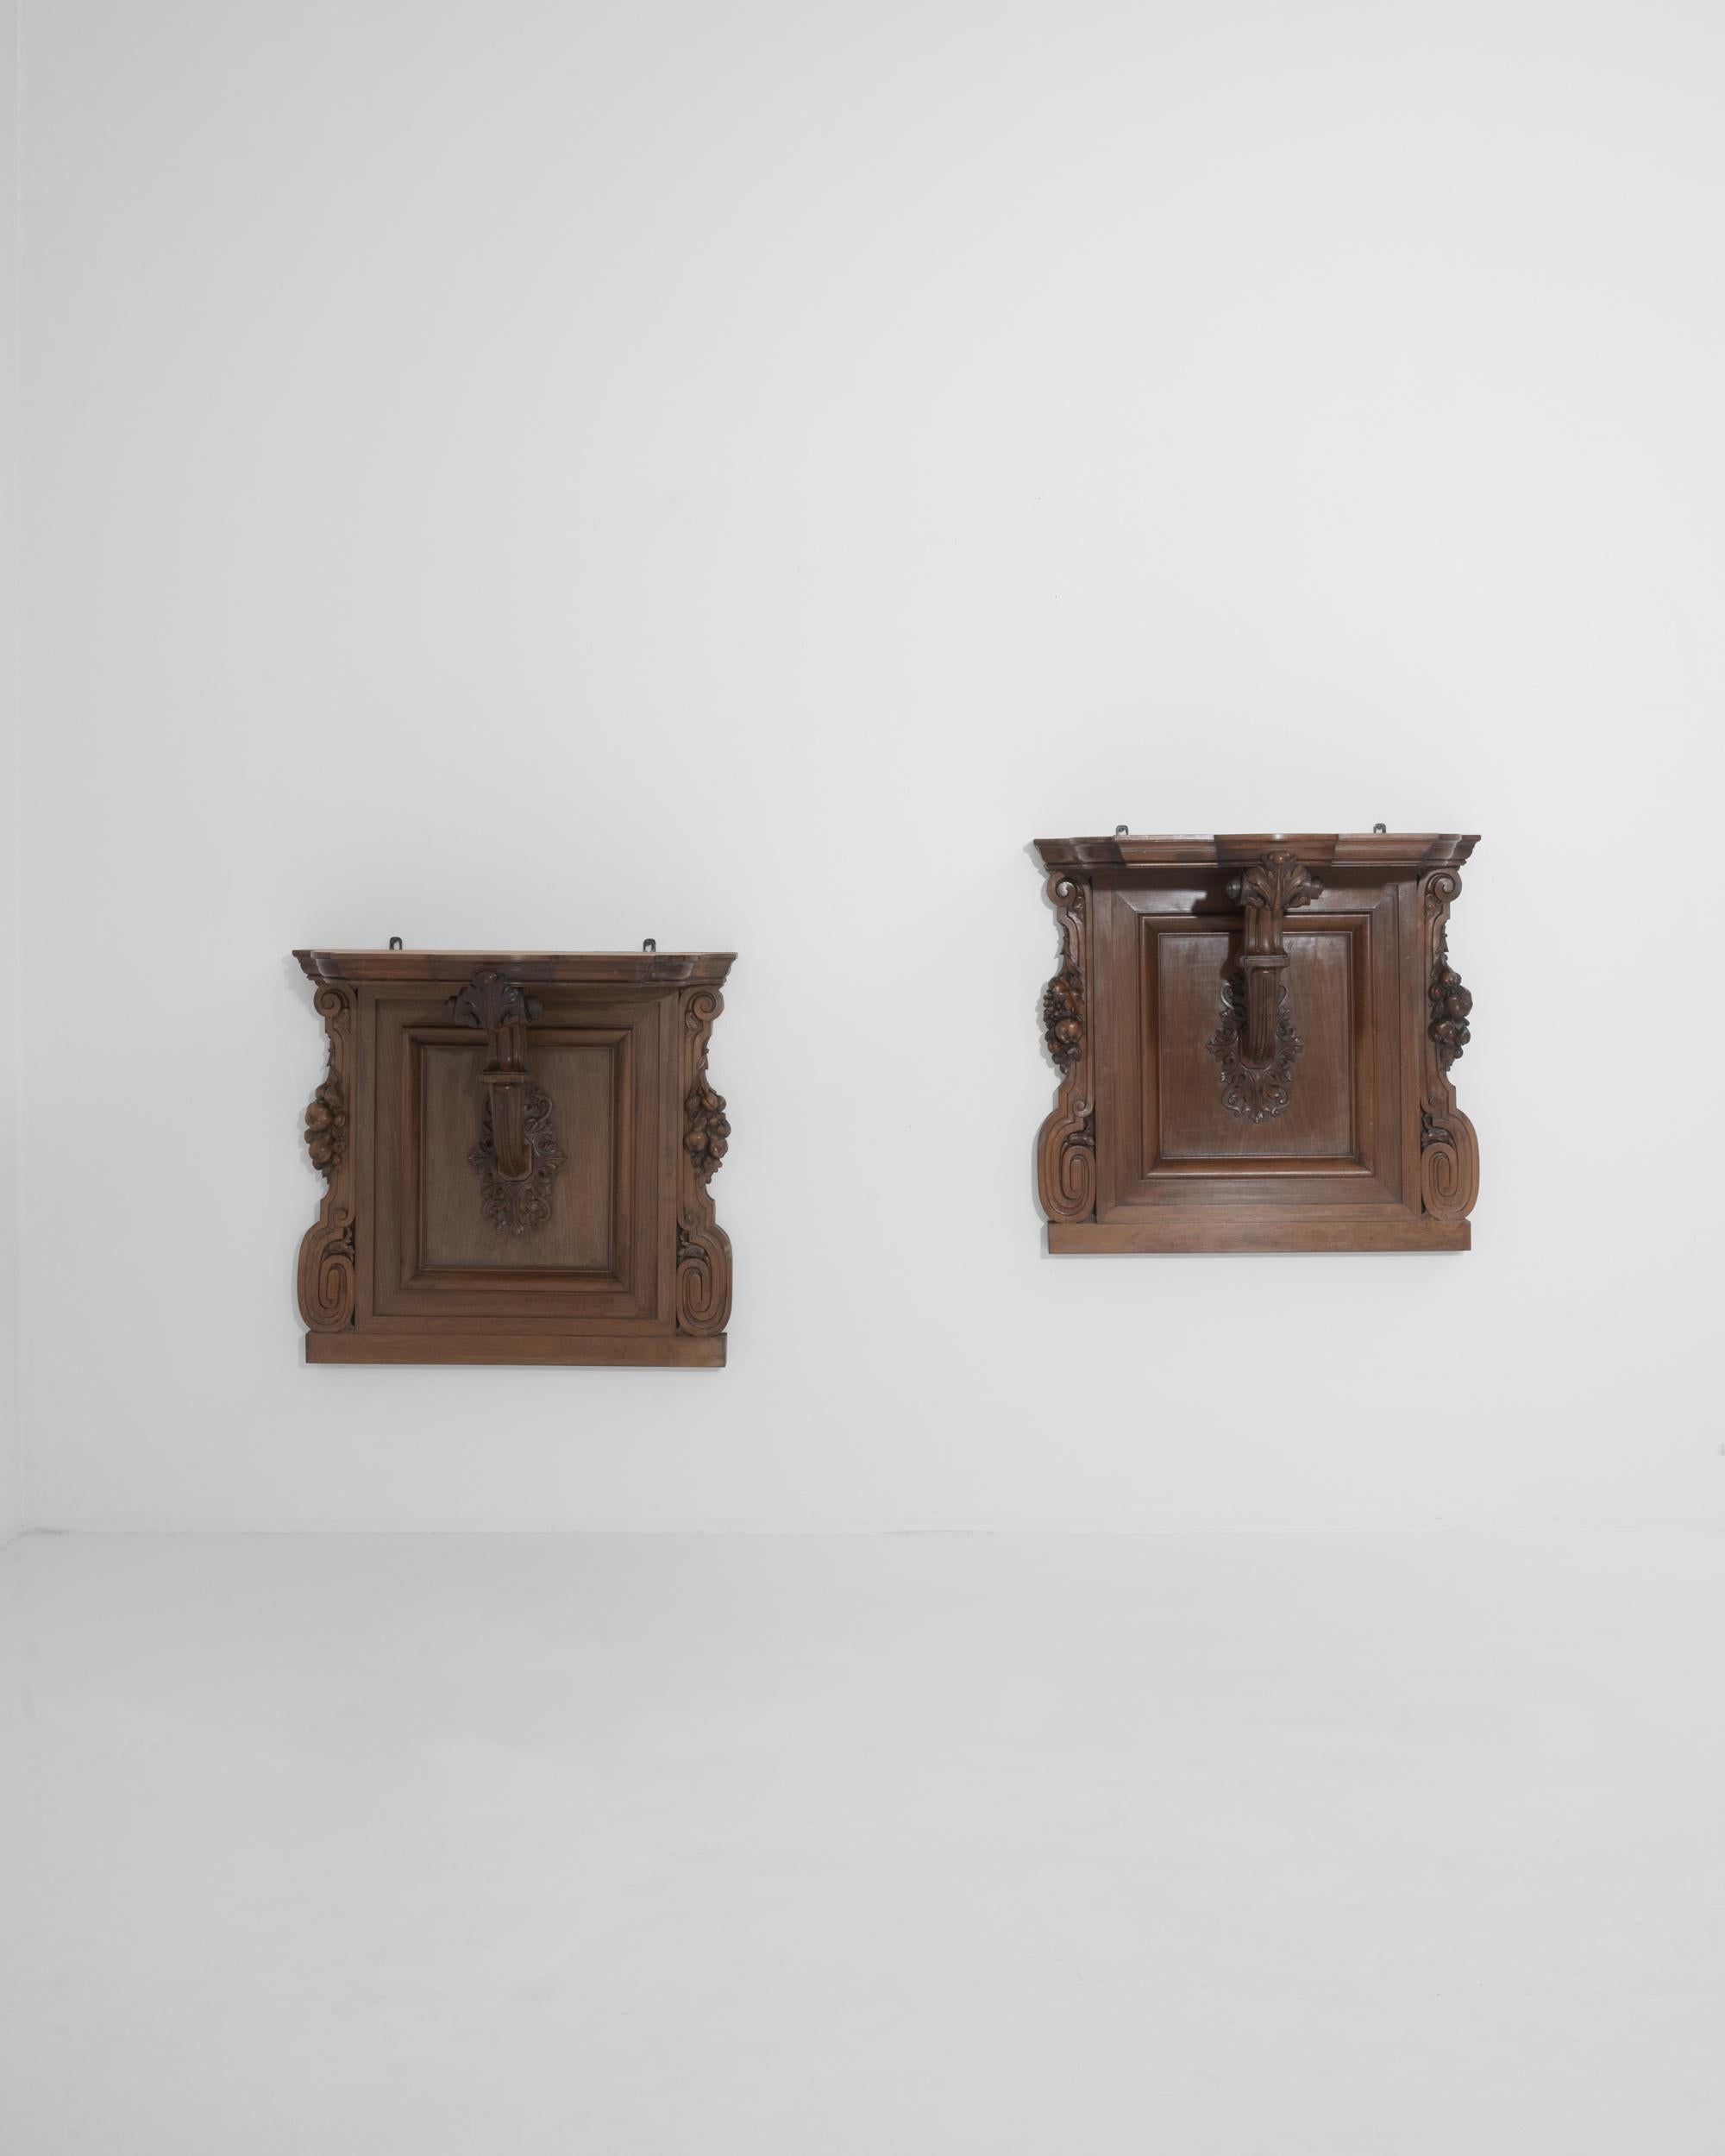 A pair of wooden wall consoles made during the 19th century in France. A stylized corbel extends from the center of each console to support the wall mounted shelf. A chocolate brown hue colors this pair, the moody warmth creating a versatile mood to